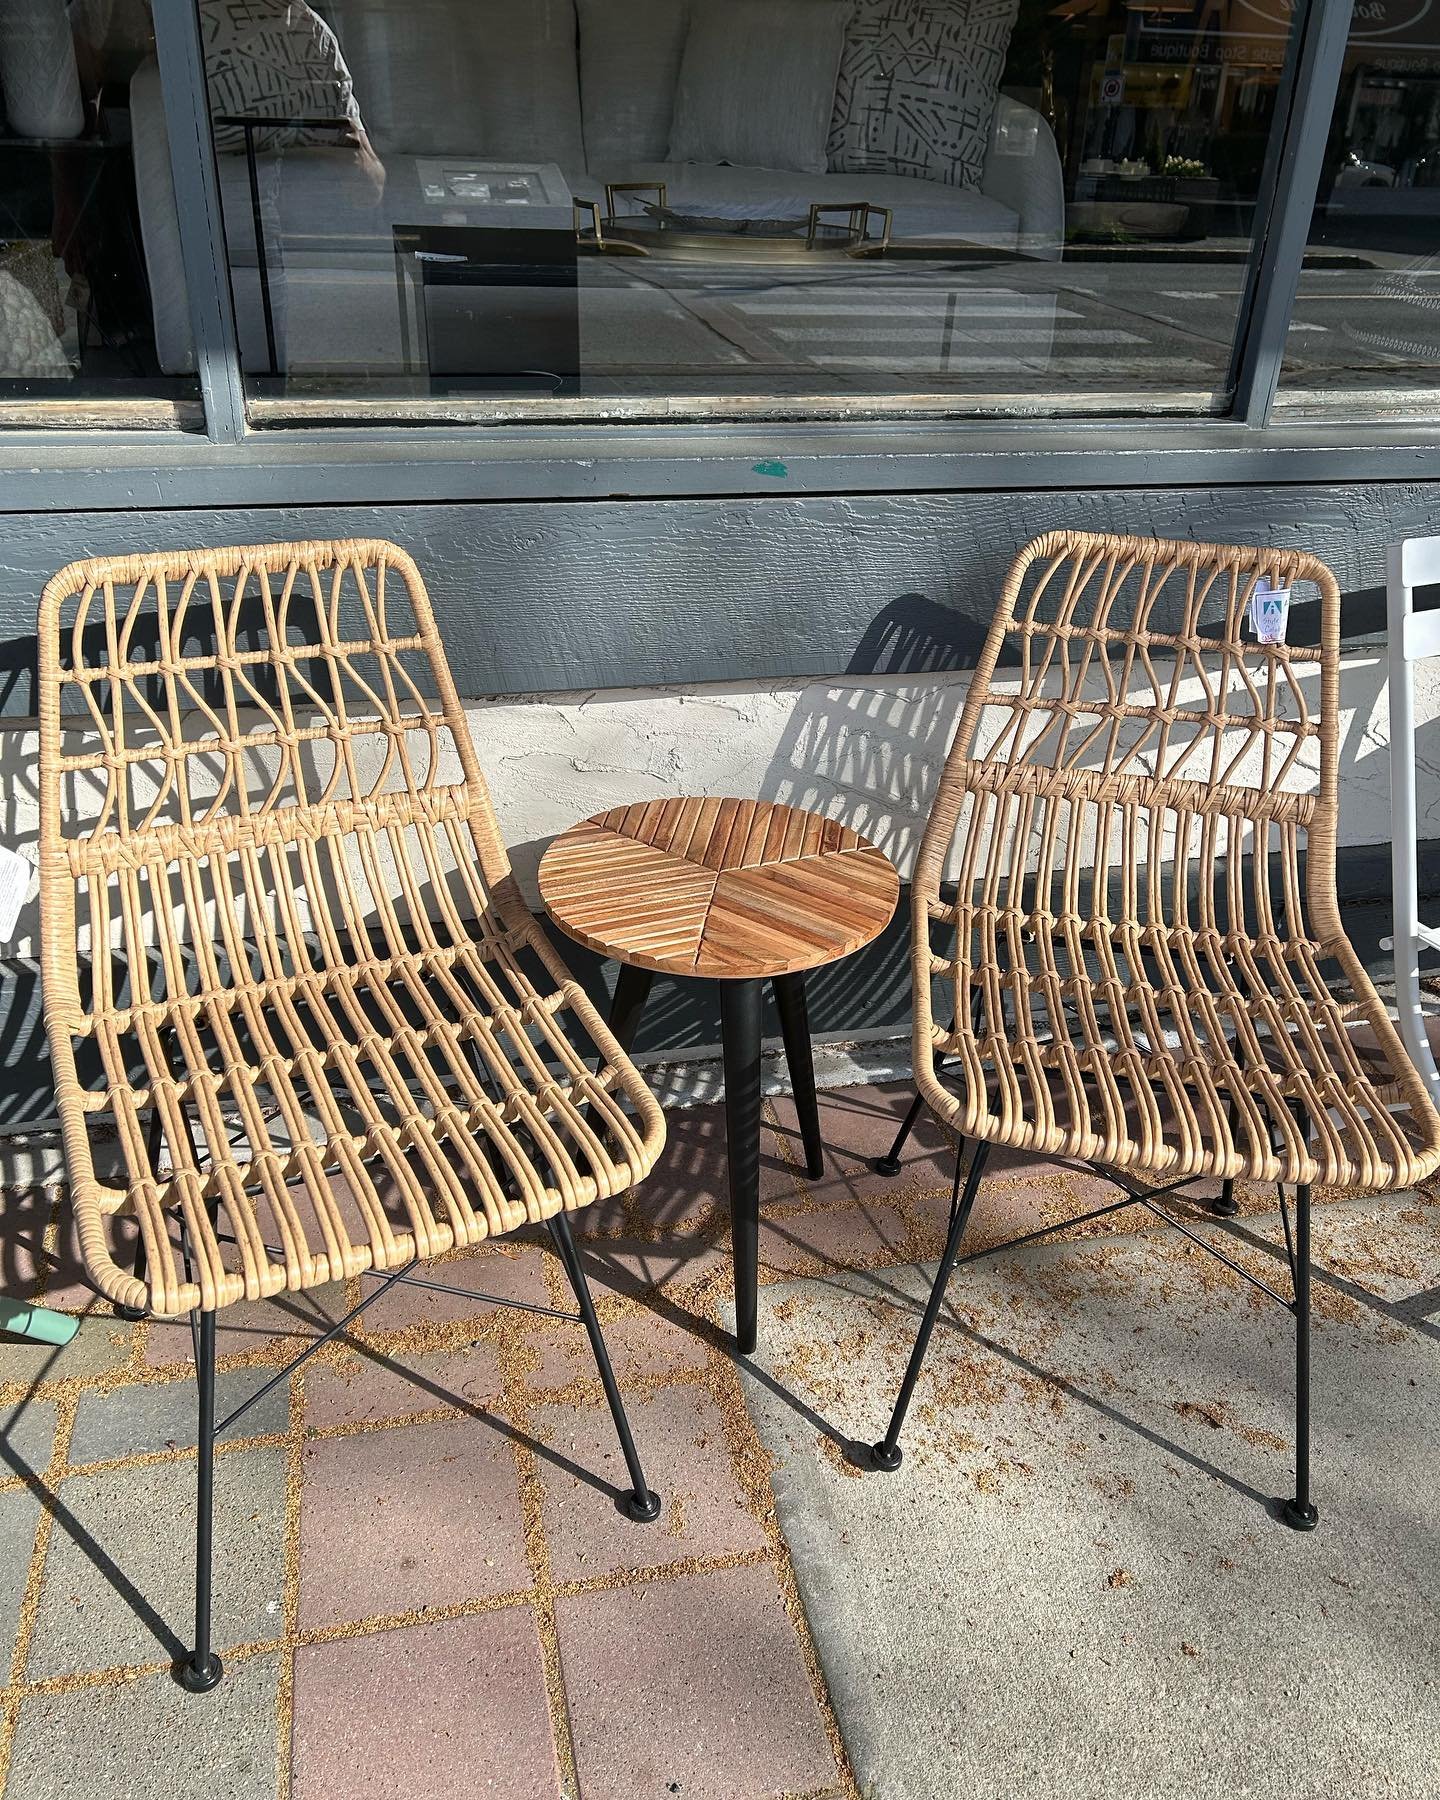 It&rsquo;s patio season!!! We have some lovely options to spruce up your outdoor living areas! AND they&rsquo;re all 
ON SALE!!! #bistroset #patio #outdoor #living